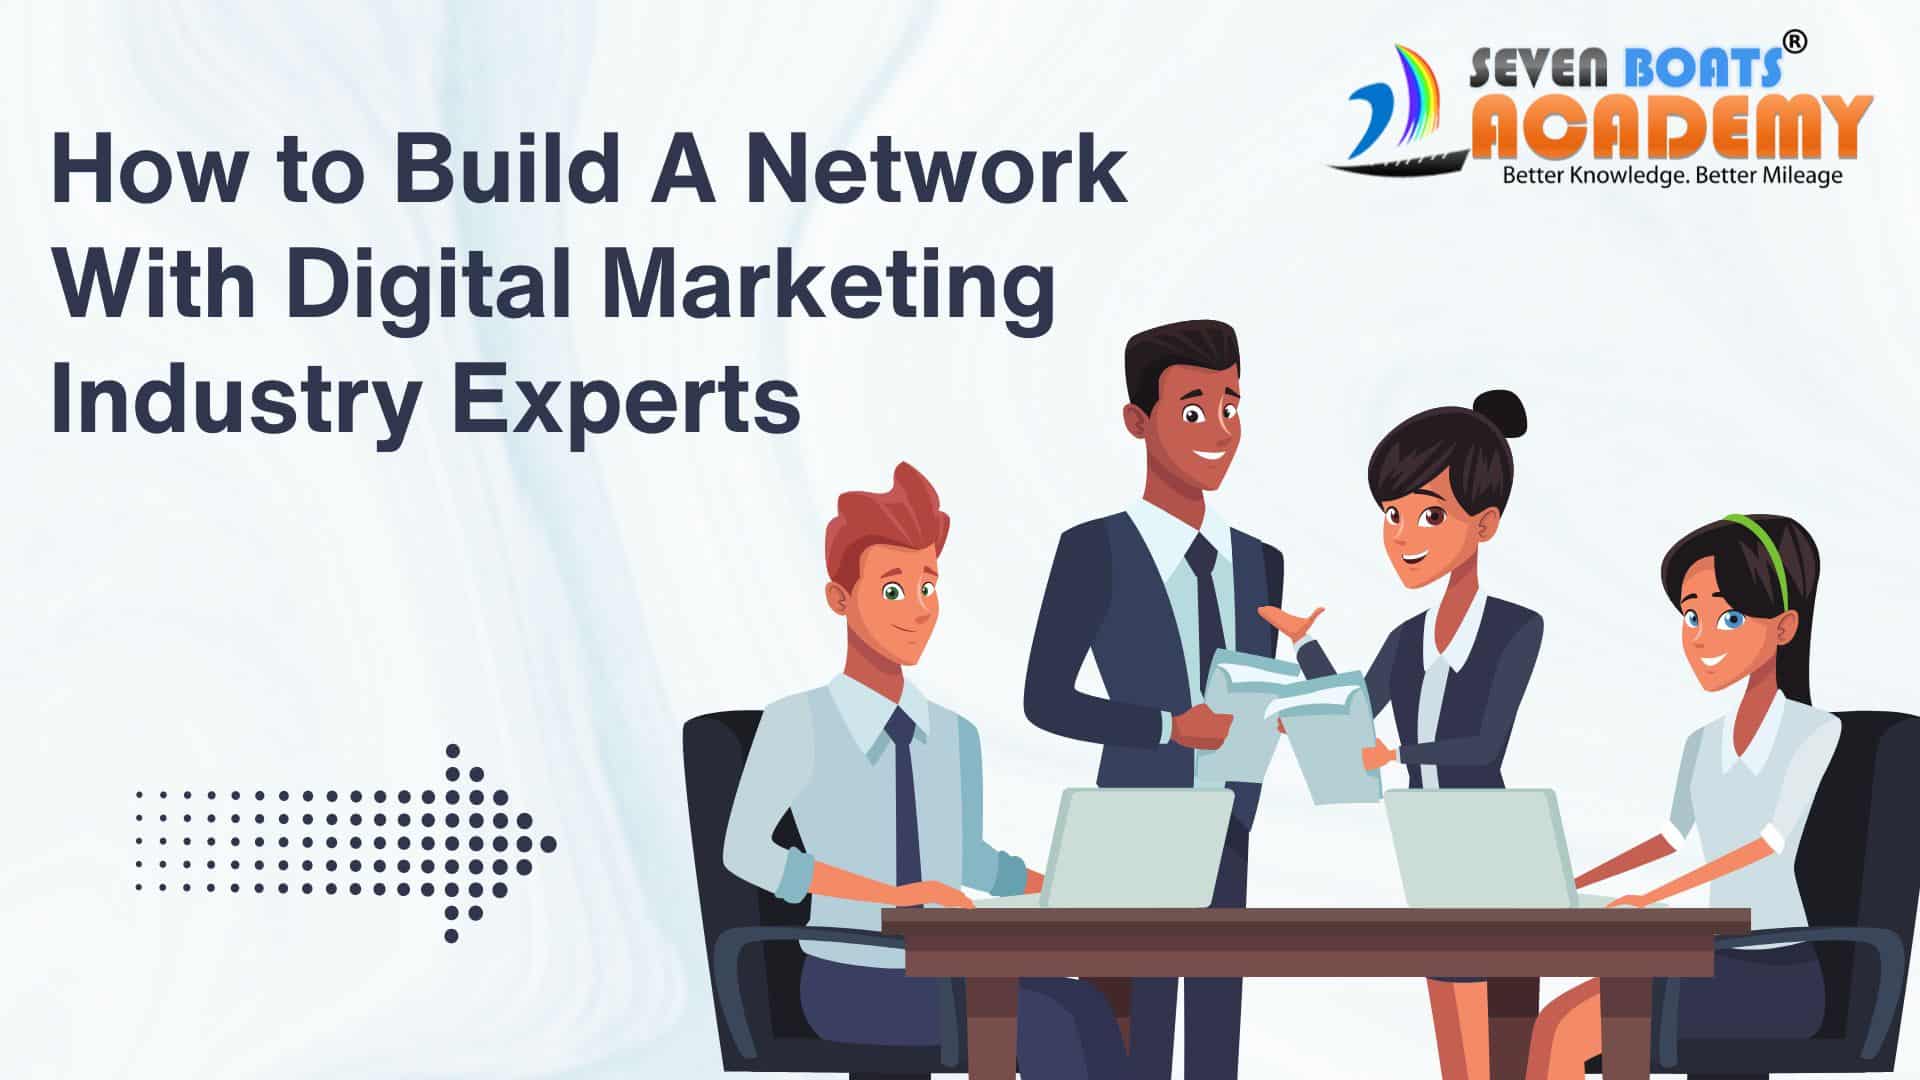 How to Build A Network With Digital Marketing Industry Experts